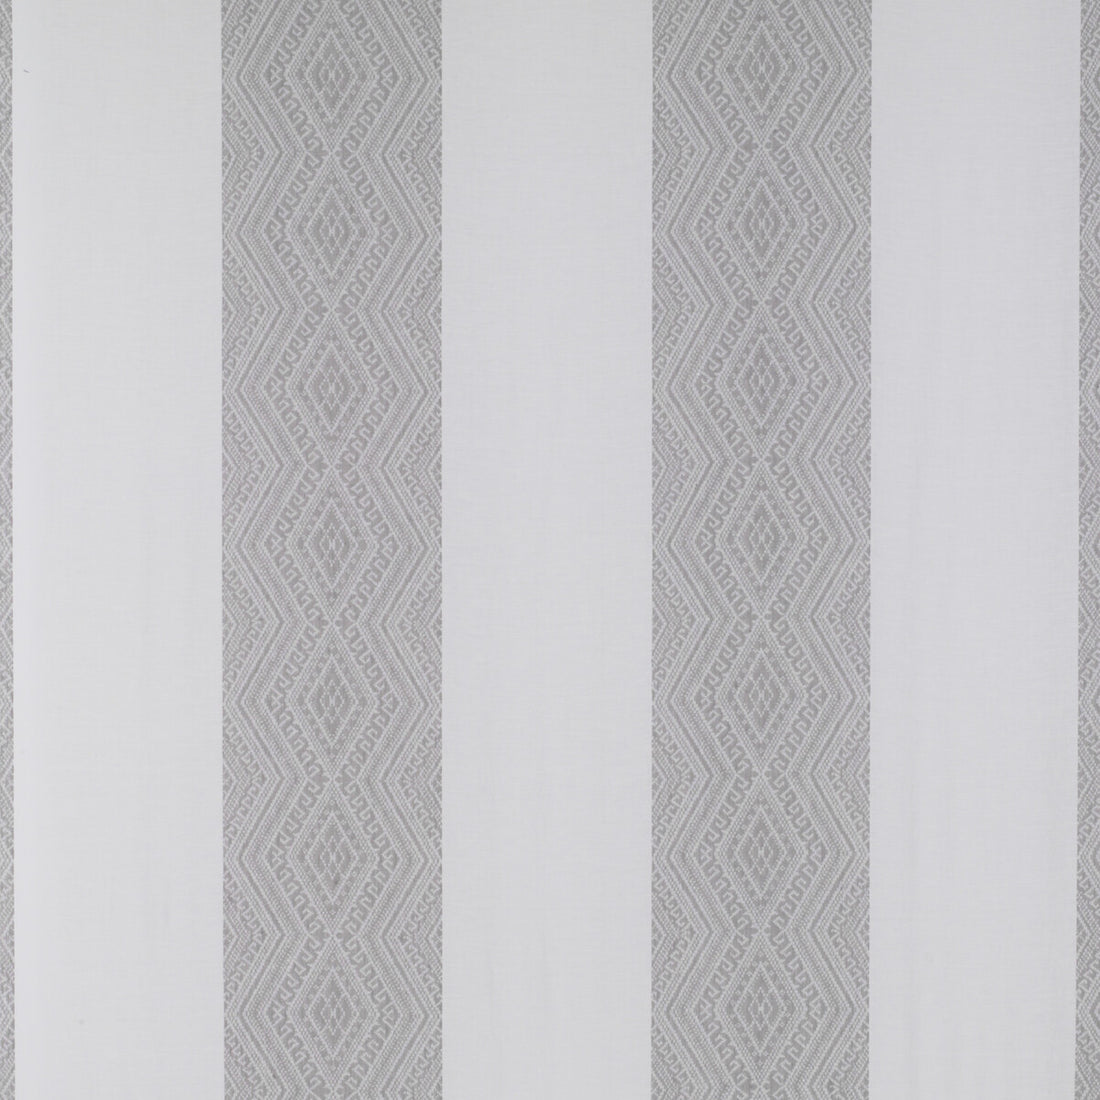 Pianosa fabric in piedra color - pattern GDT5312.003.0 - by Gaston y Daniela in the Tierras collection